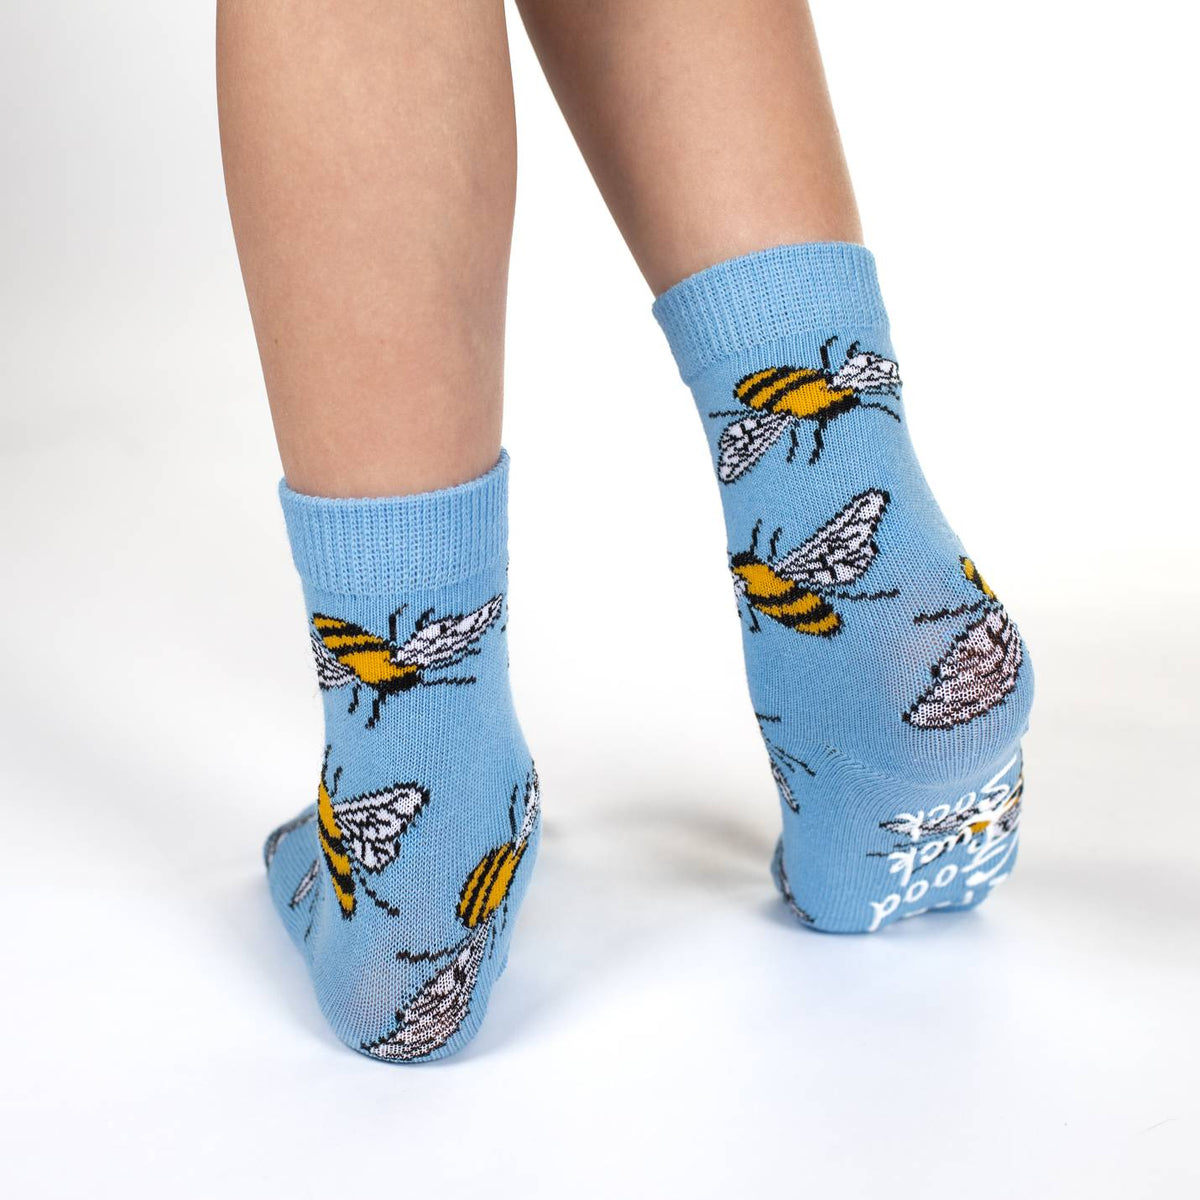 Bees, Bunnies and Dogs Kids Socks